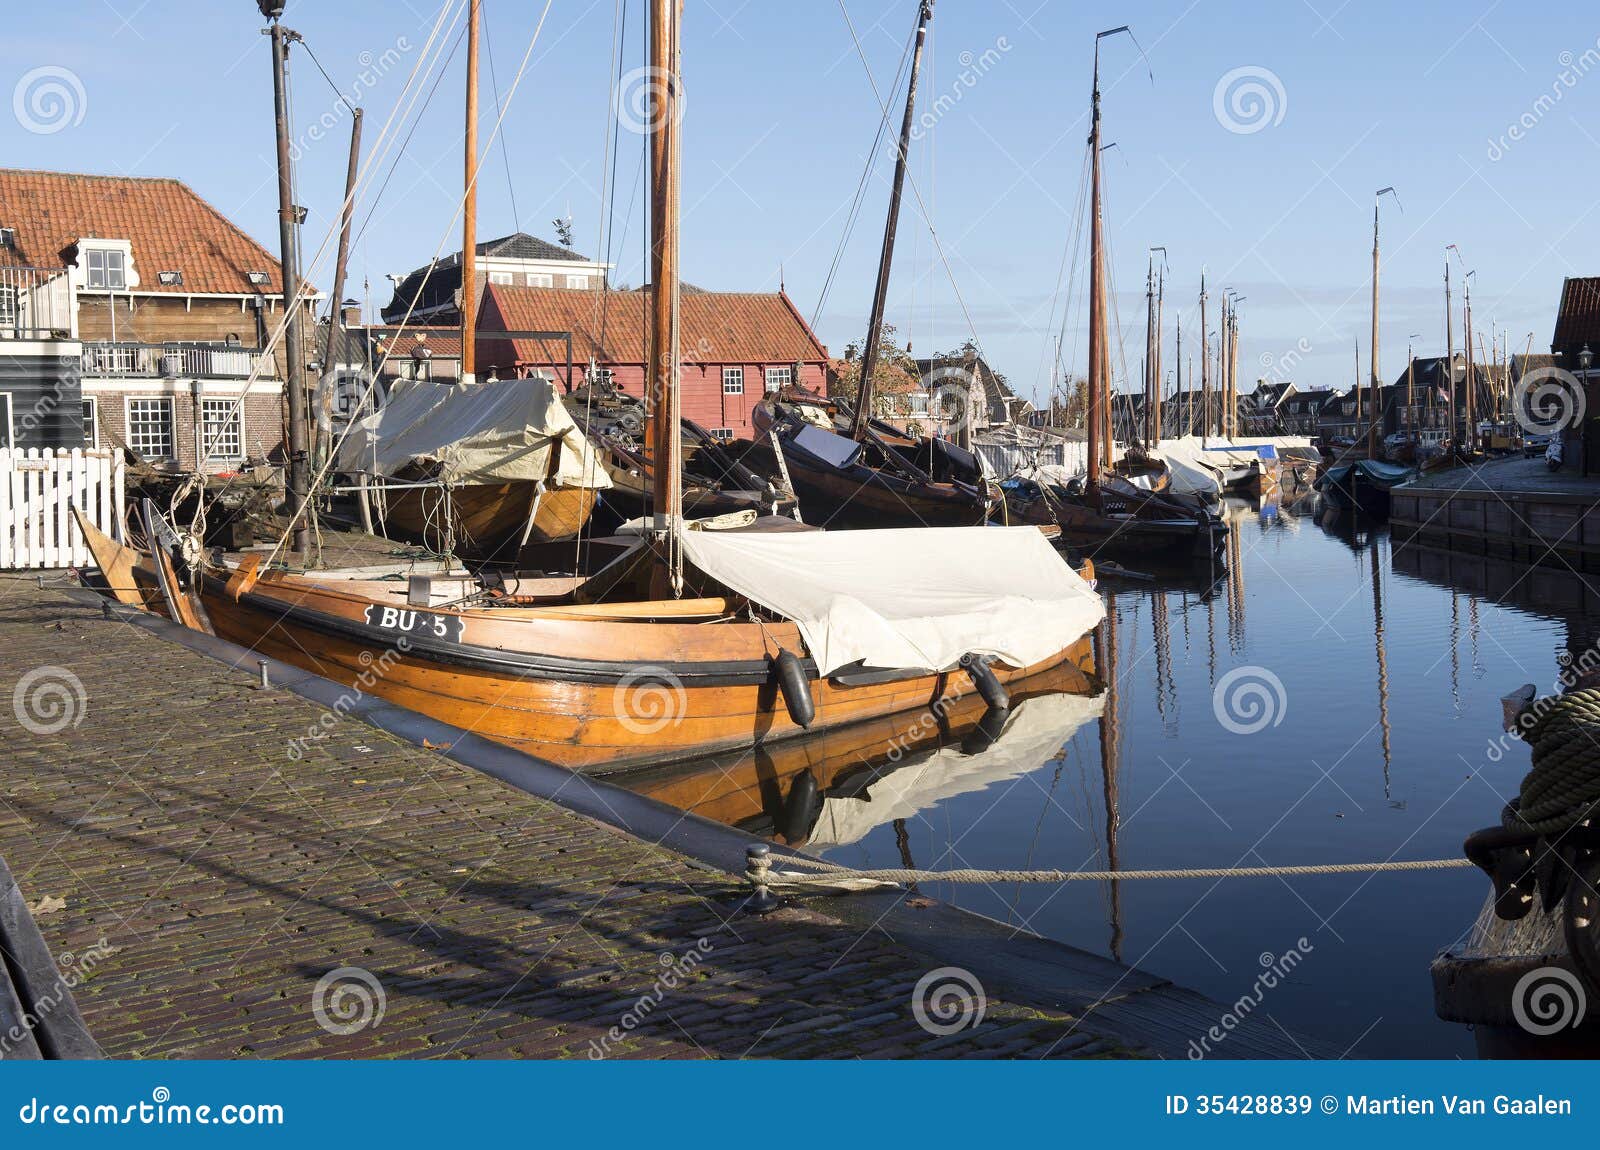 Boat Yard For Fishing Boats. Royalty Free Stock Images ...